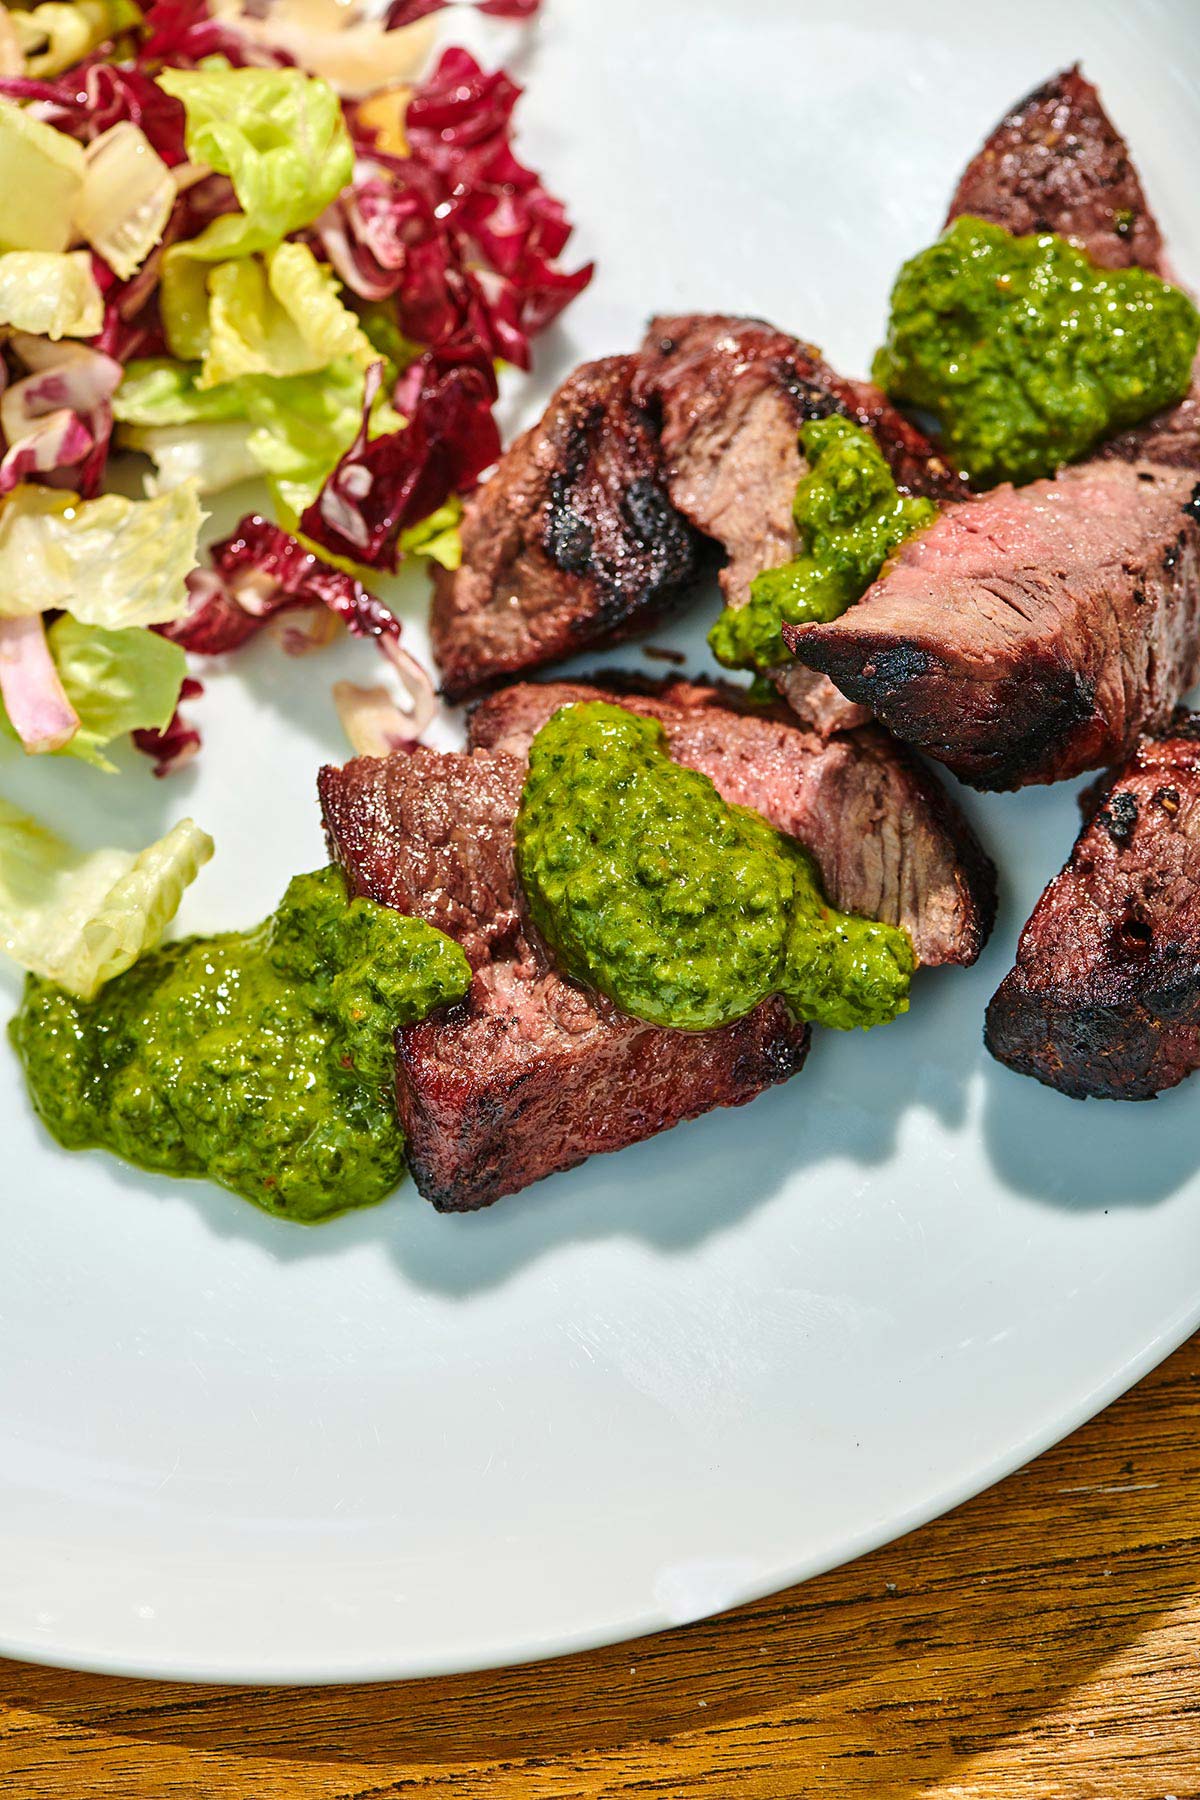 Slices of grilled sirloin cap with chimichurri sauce on white plate.